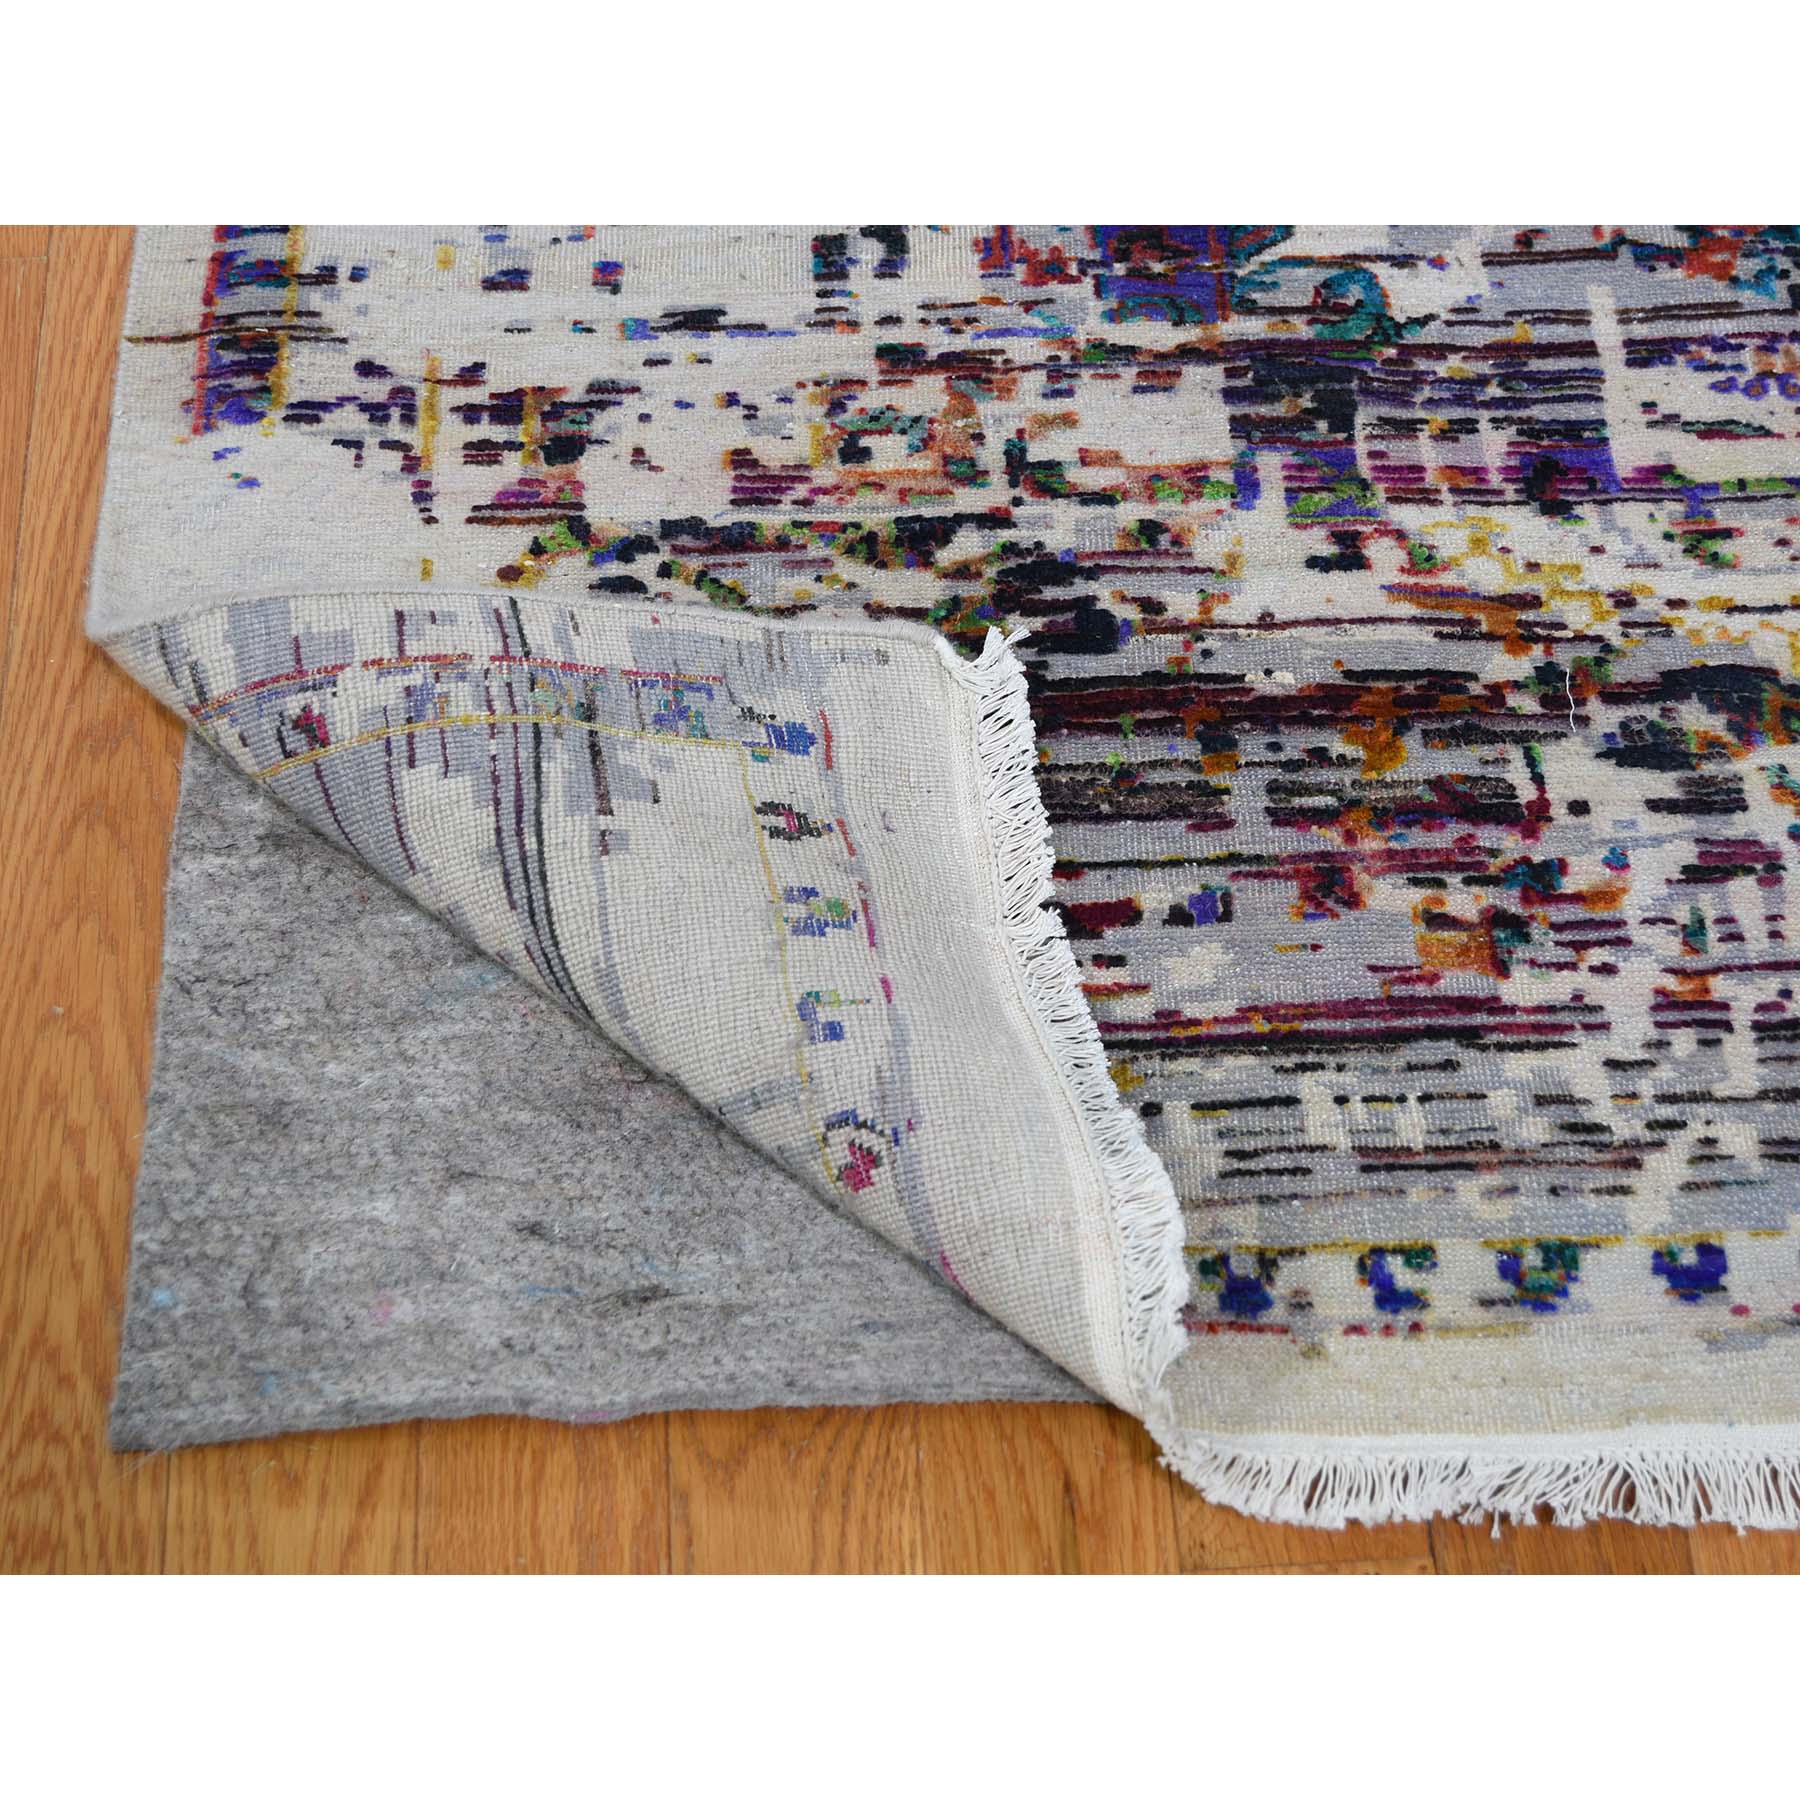 9-10 x14-3  ERASED ROSSETS, Colorful Sari Silk With Textured Wool Hand-Knotted Oriental Rug 